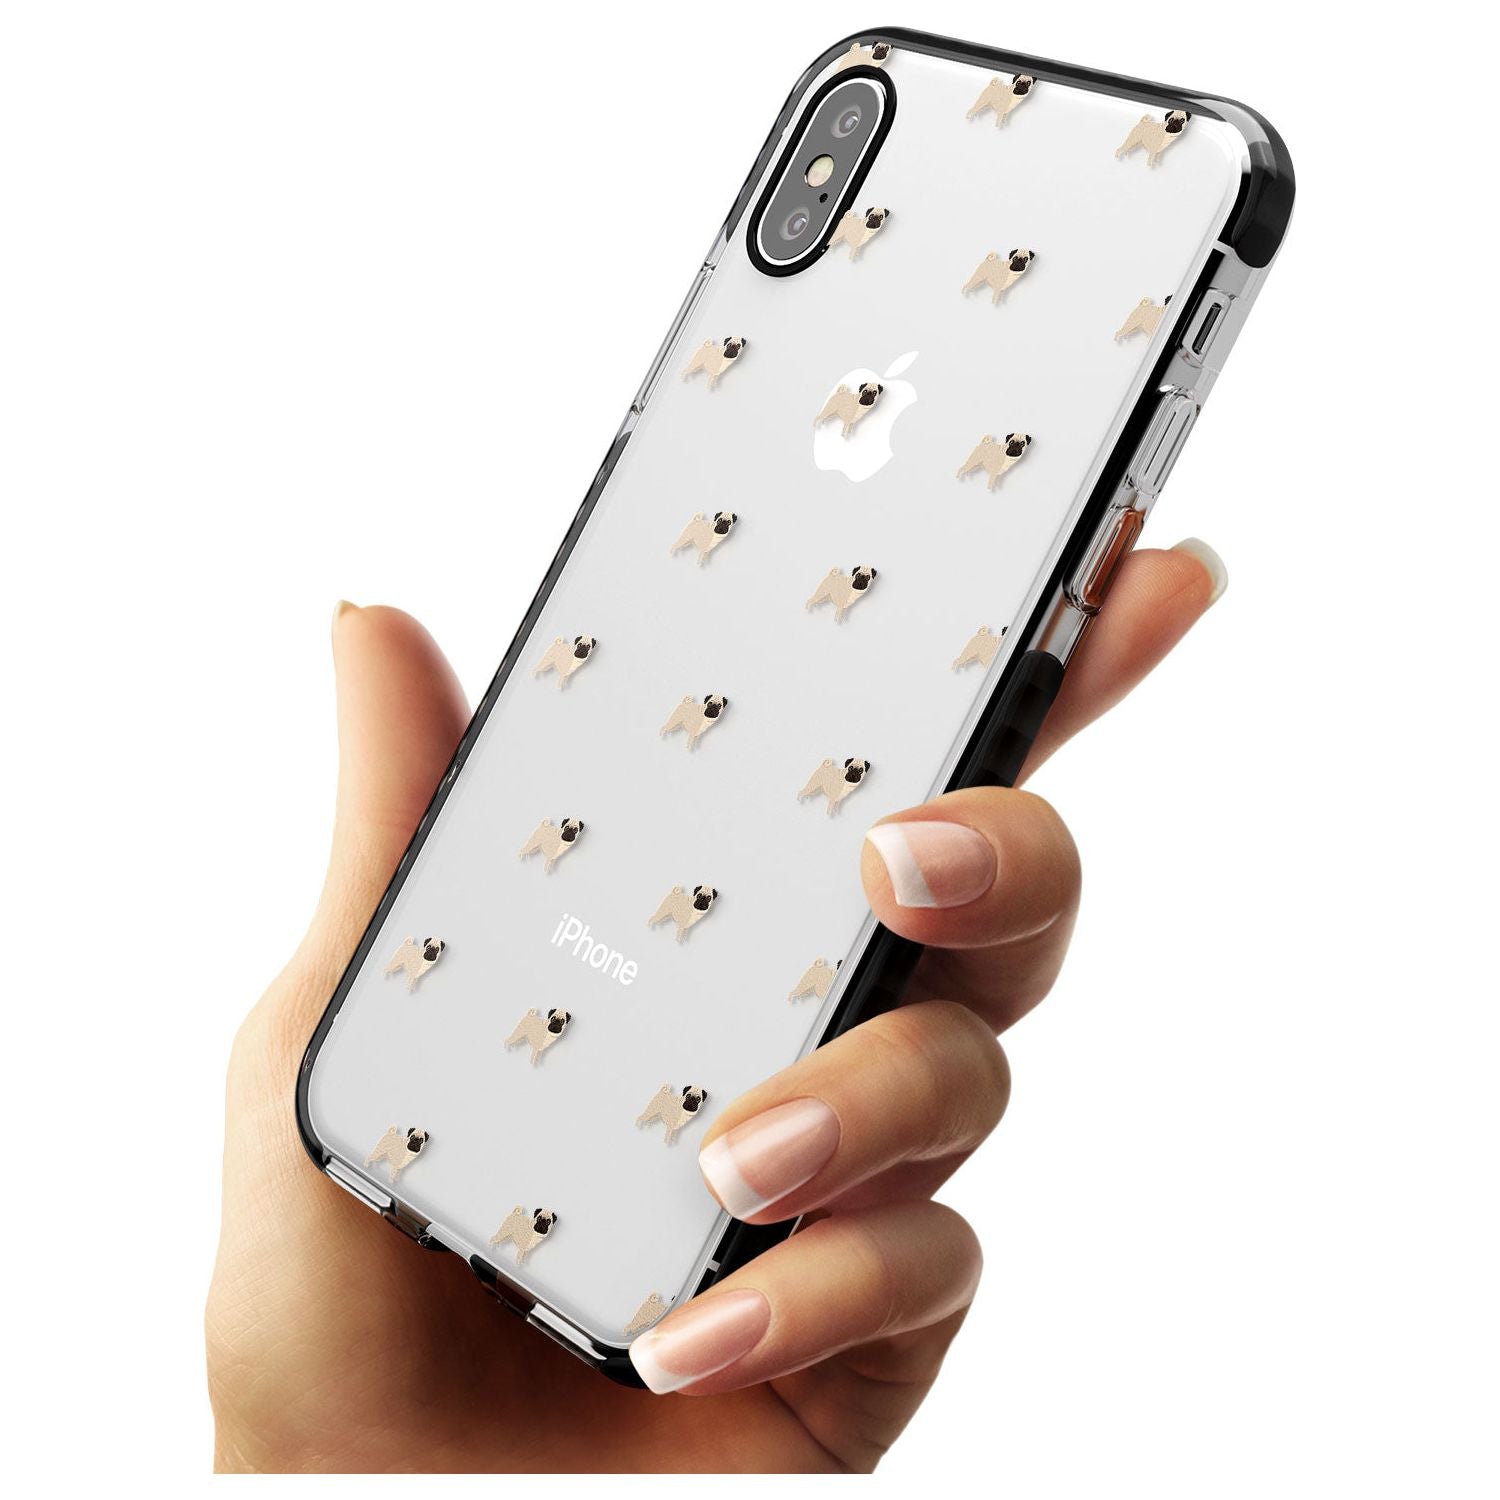 Pug Dog Pattern Clear Black Impact Phone Case for iPhone X XS Max XR